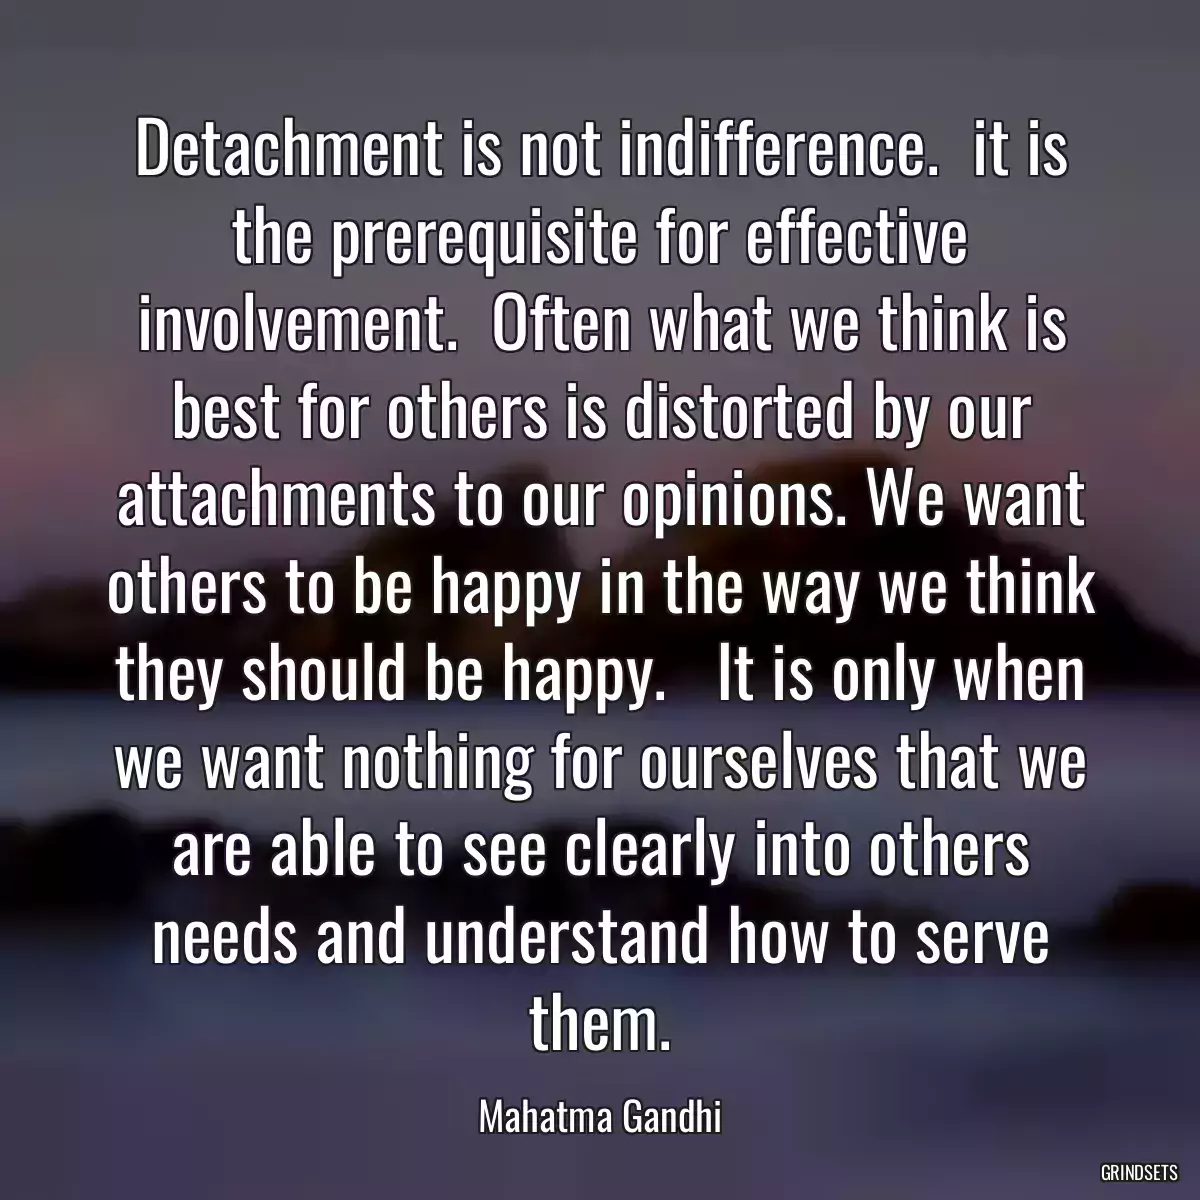 Detachment is not indifference.  it is the prerequisite for effective involvement.  Often what we think is best for others is distorted by our attachments to our opinions. We want others to be happy in the way we think they should be happy.   It is only when we want nothing for ourselves that we are able to see clearly into others needs and understand how to serve them.